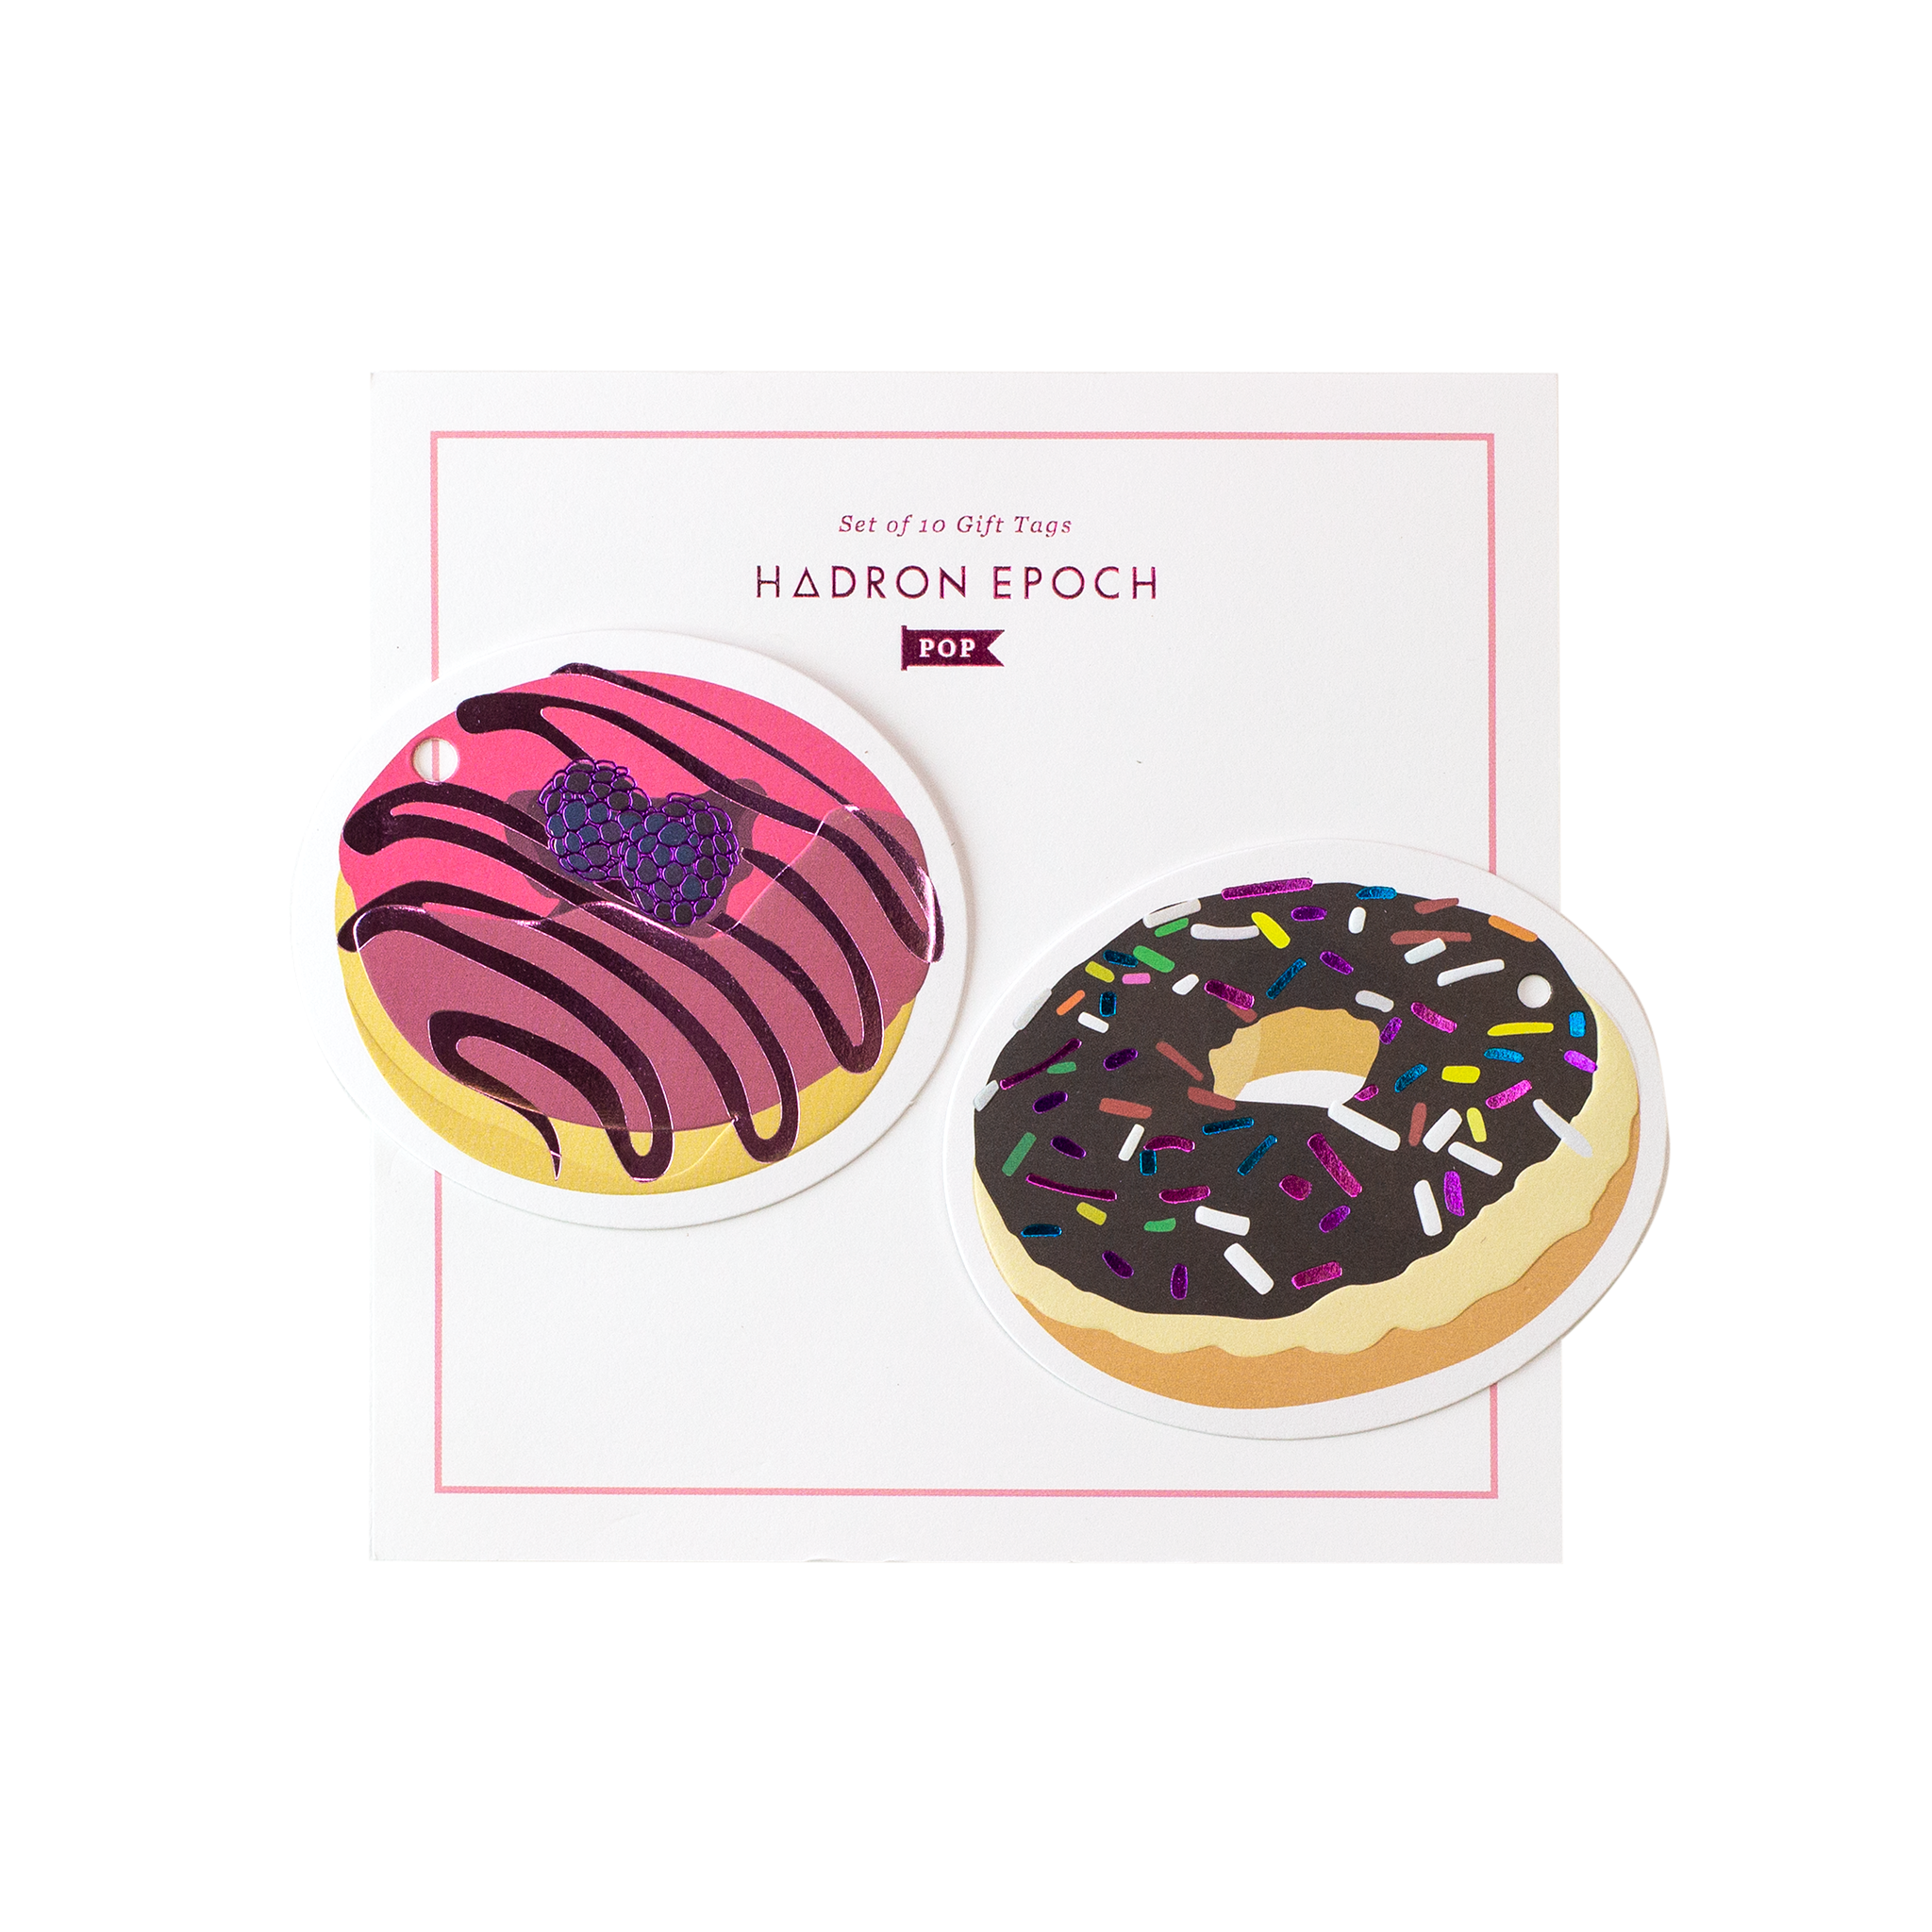 DONUTS GIFT TAGS - Hadron Epoch